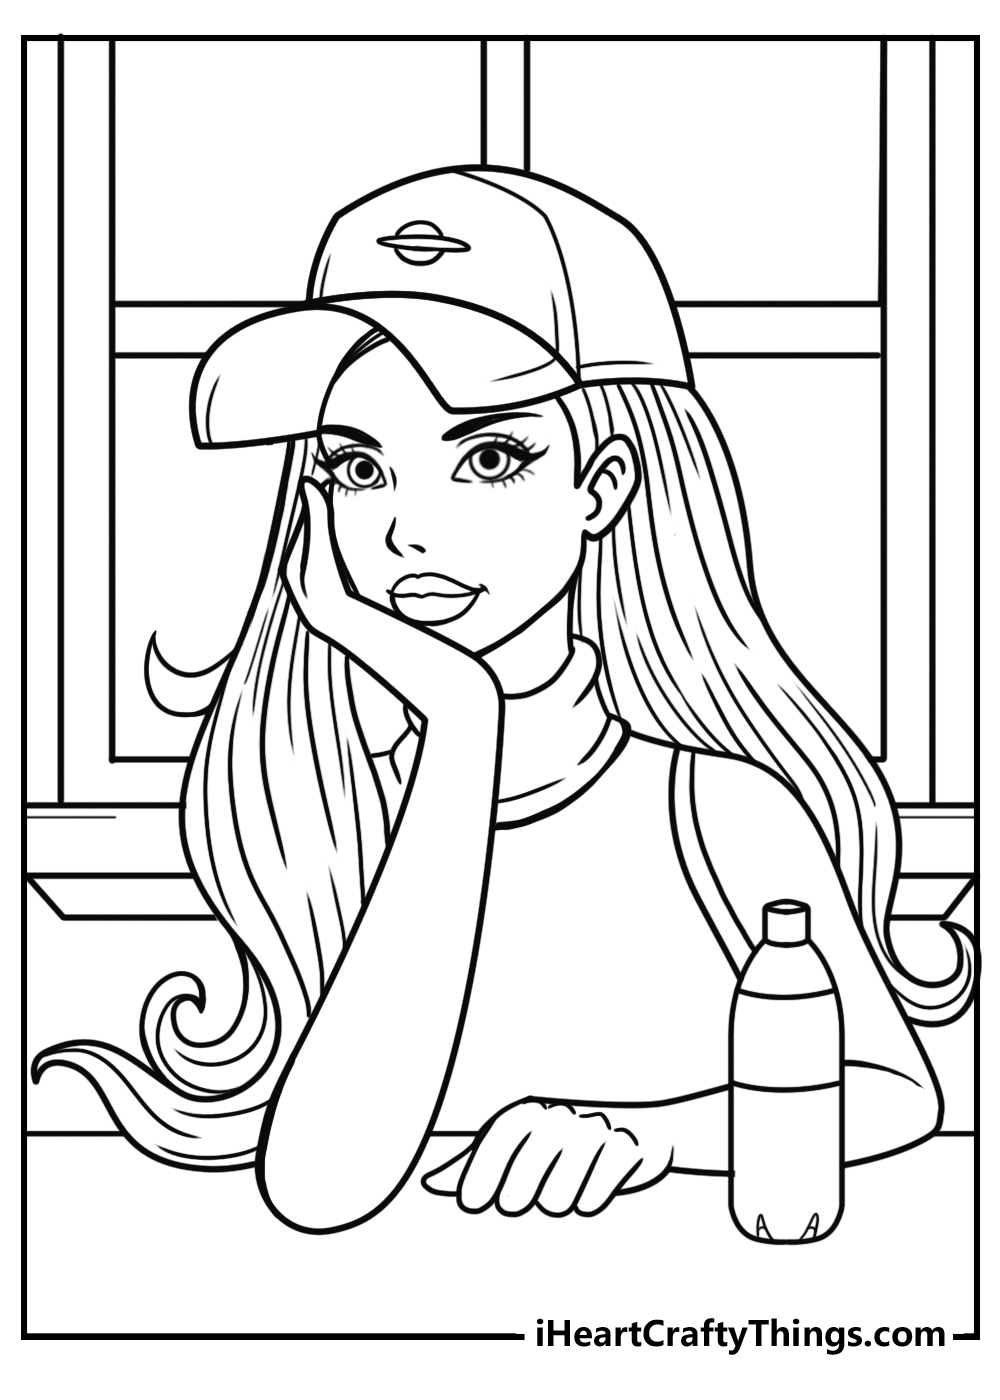 Barbie Coloring Pages - All New And Updated For 2022